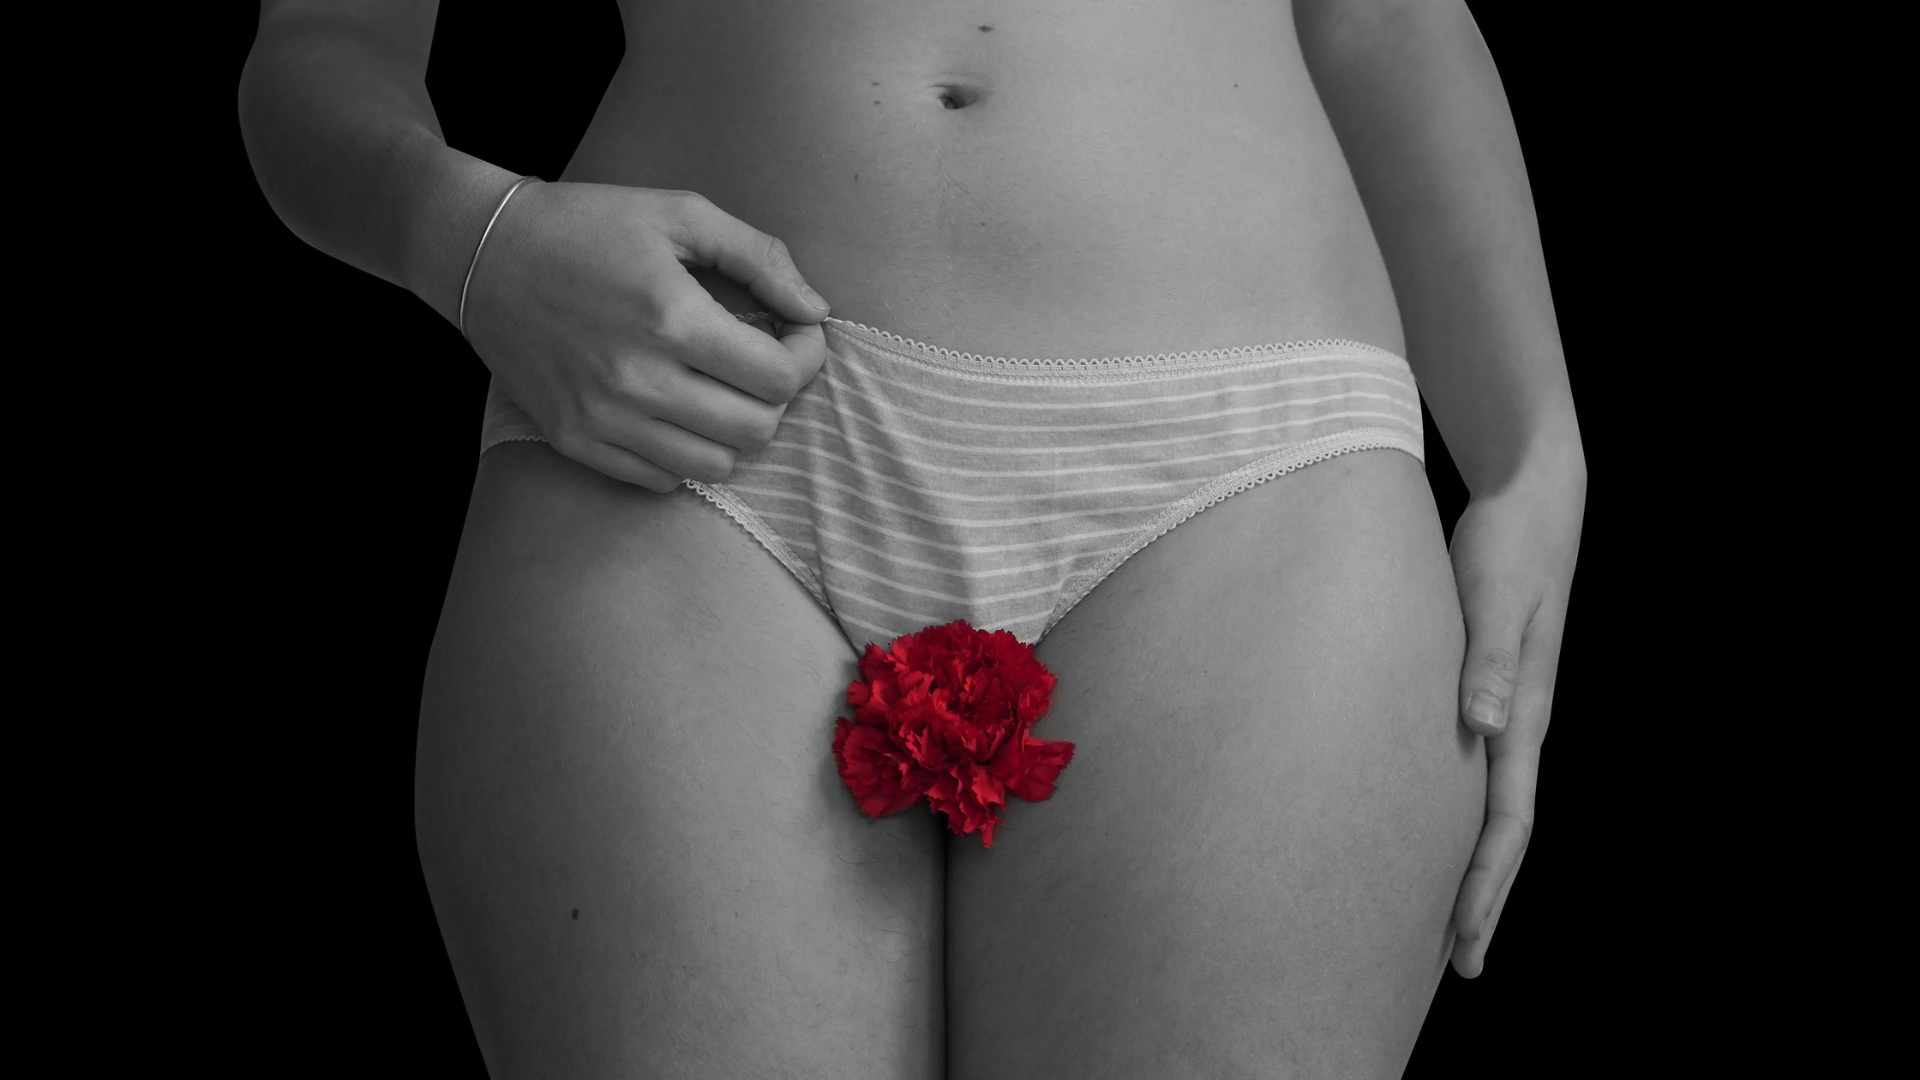 A standing woman with a red flower in front of her vagina